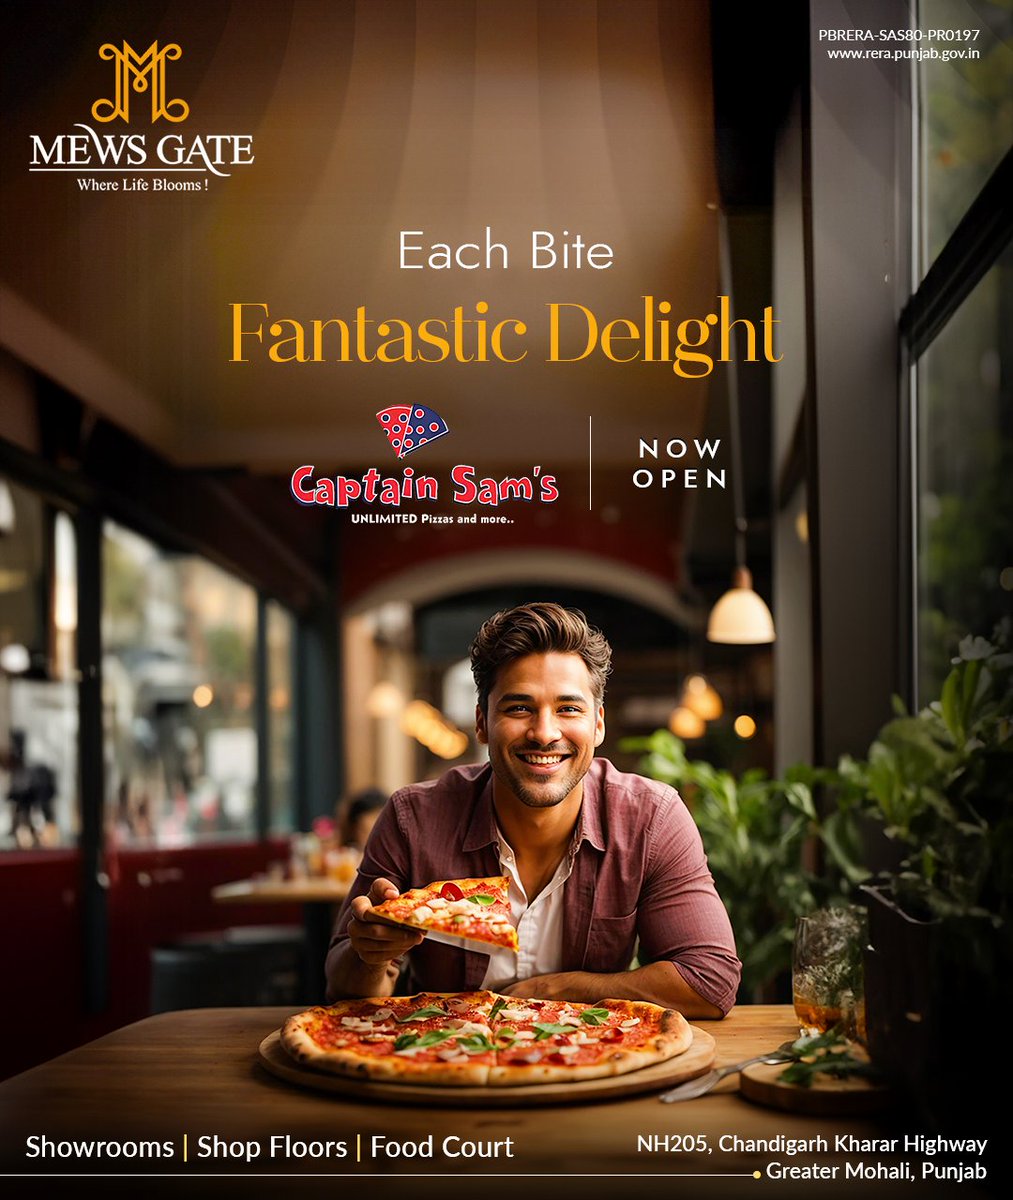 Indulge in a culinary adventure at Captain Sam's, now serving up at Mews Gate. Showrooms | Shop Floors | Food Court 📍NH 205, Chandigarh Kharar Highway Greater Mohali, Punjab ↘️ Call us at 90695-90695 #MewsGate #CaptainSam #Pizza #PizzaLovers #Food #Kharar #Mohali